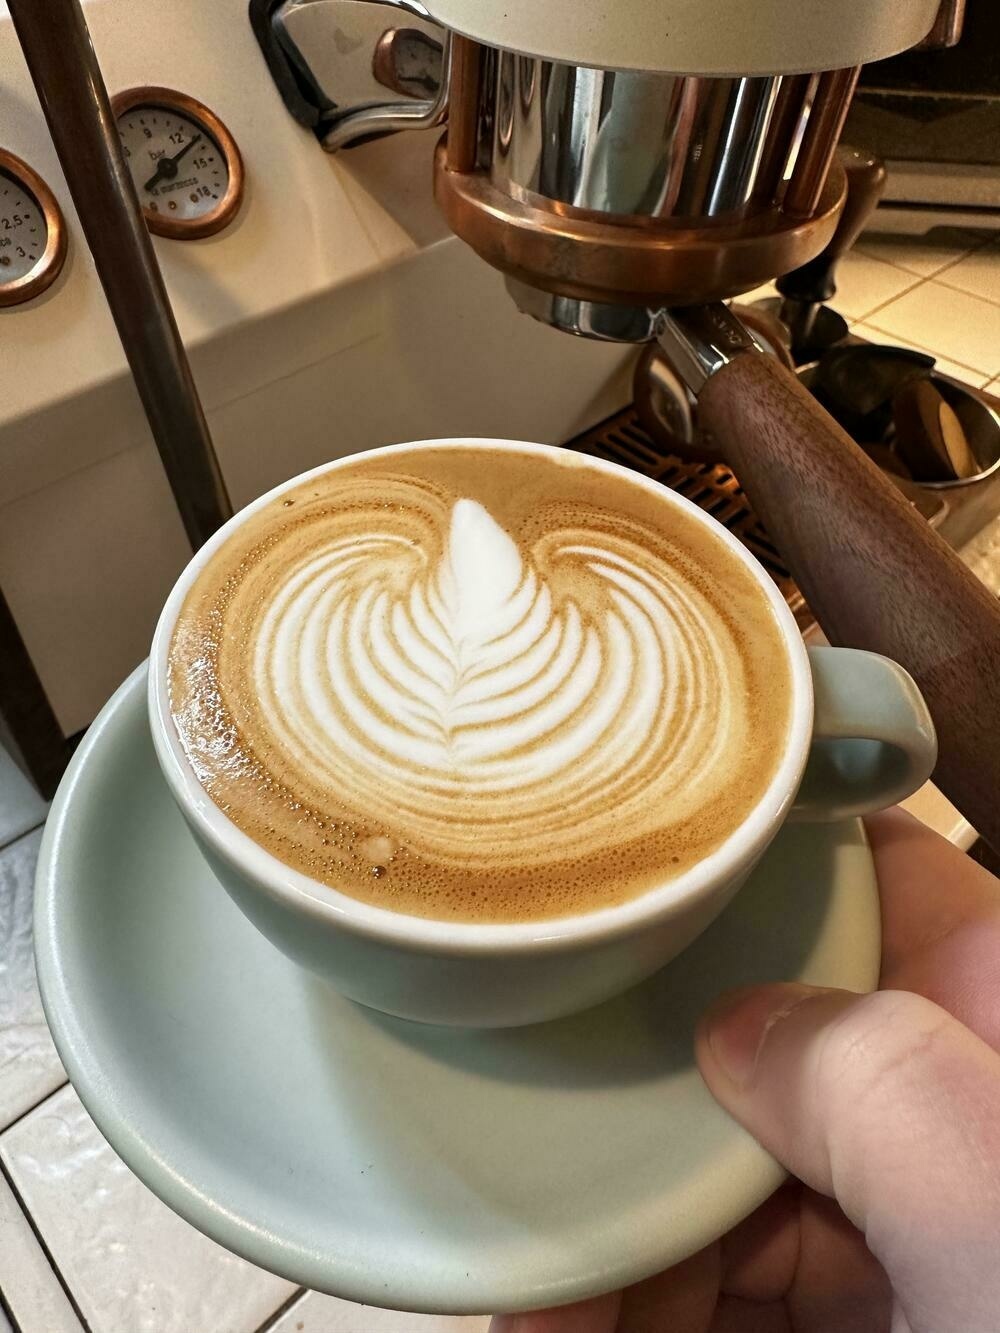 A cappuccino with a very nice rosetta for milk art